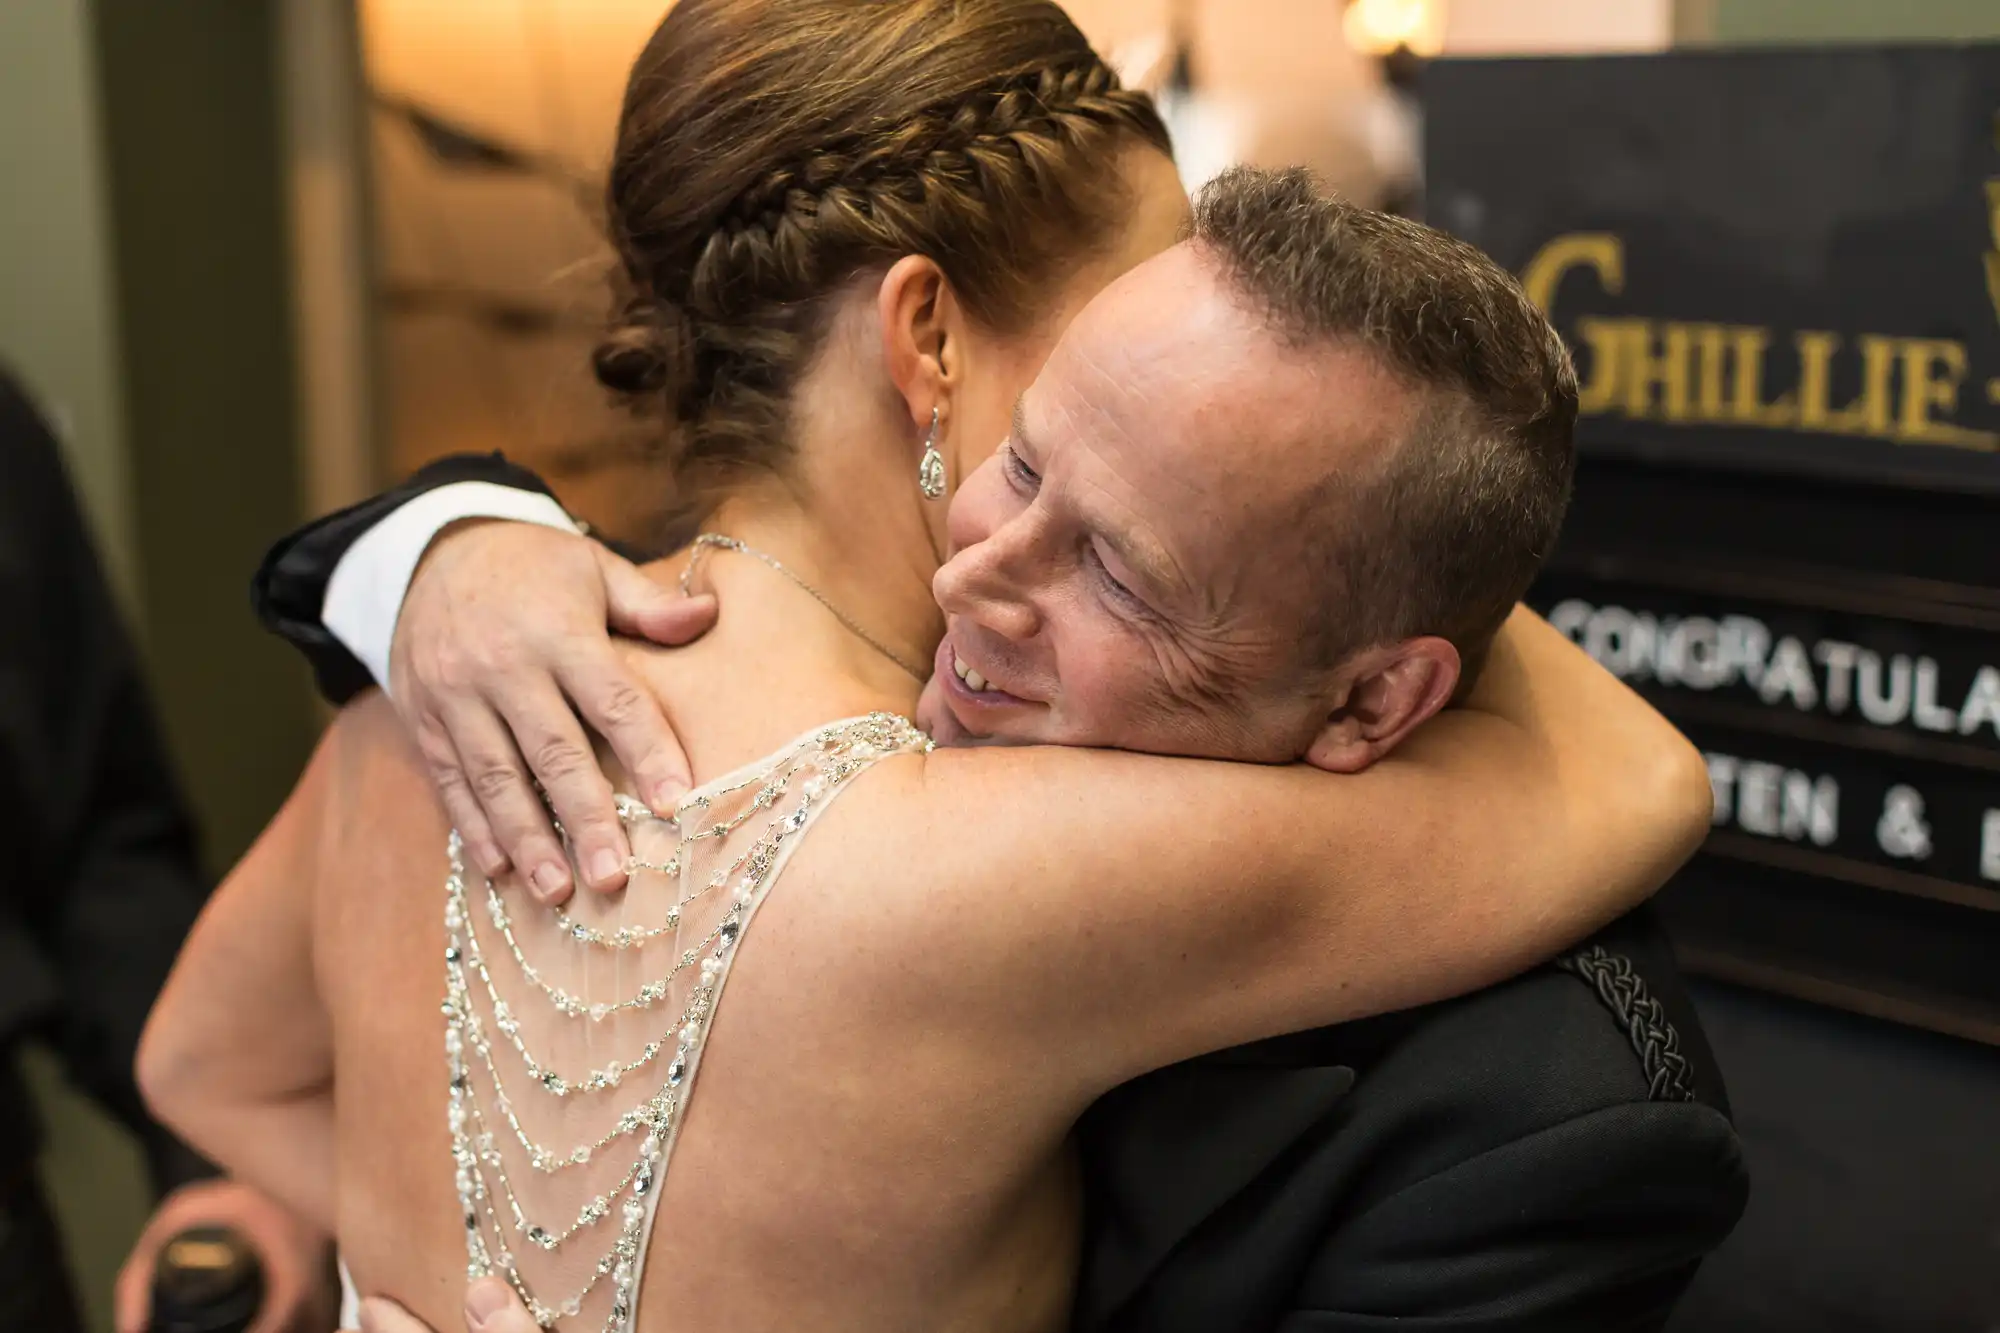 A man in a tuxedo embracing a woman in a beaded dress, both smiling joyfully, at an indoor celebration.